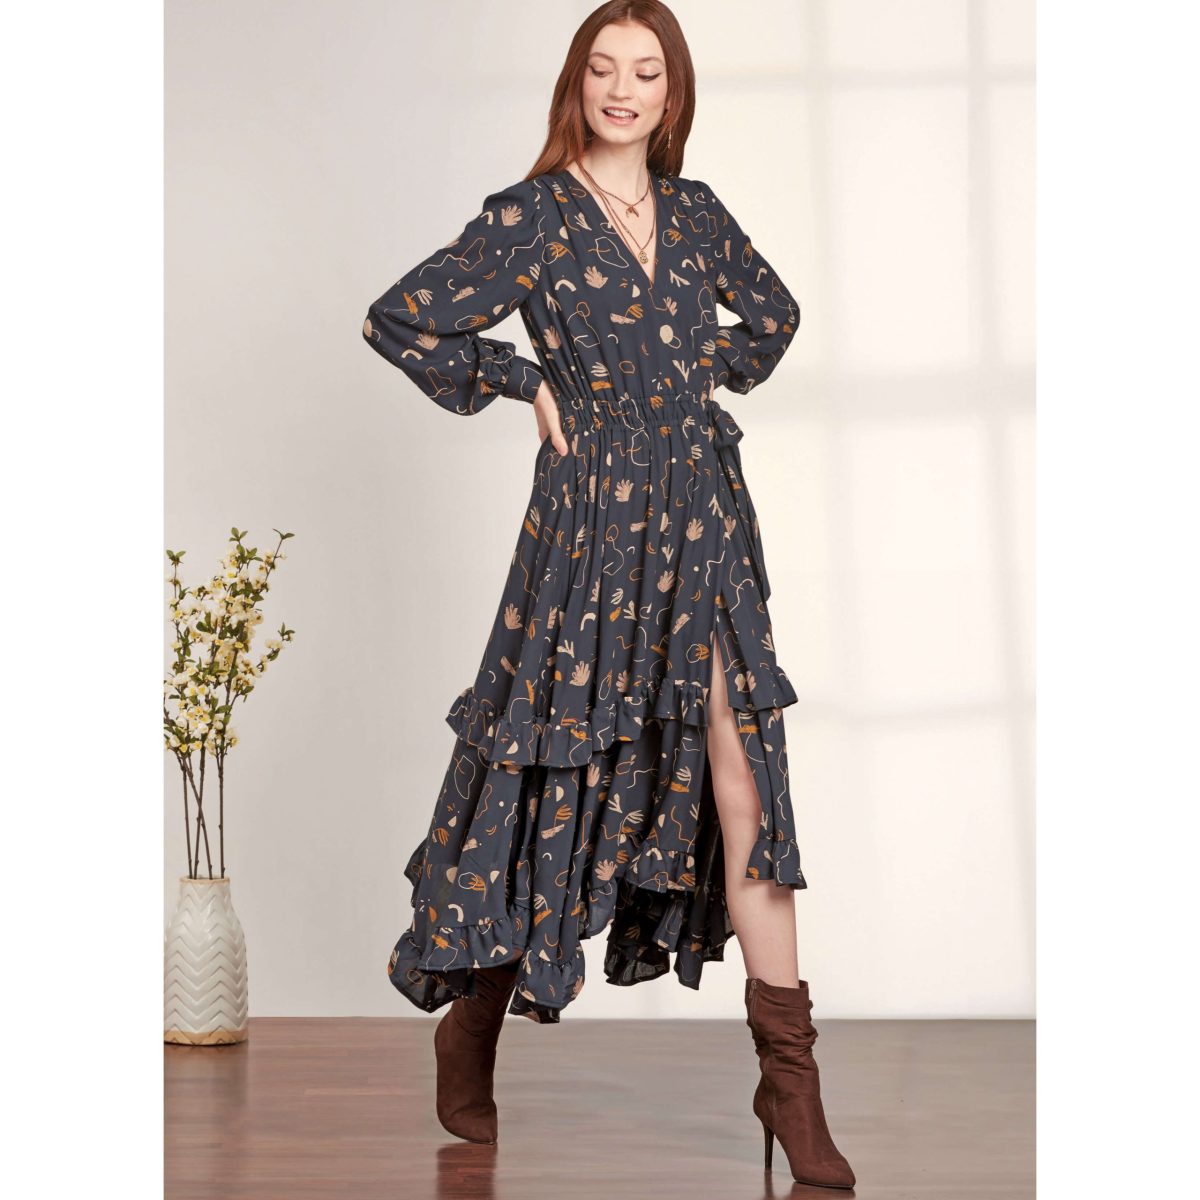 Simplicity Sewing Pattern S9639 Misses' Midi Wrap Dress